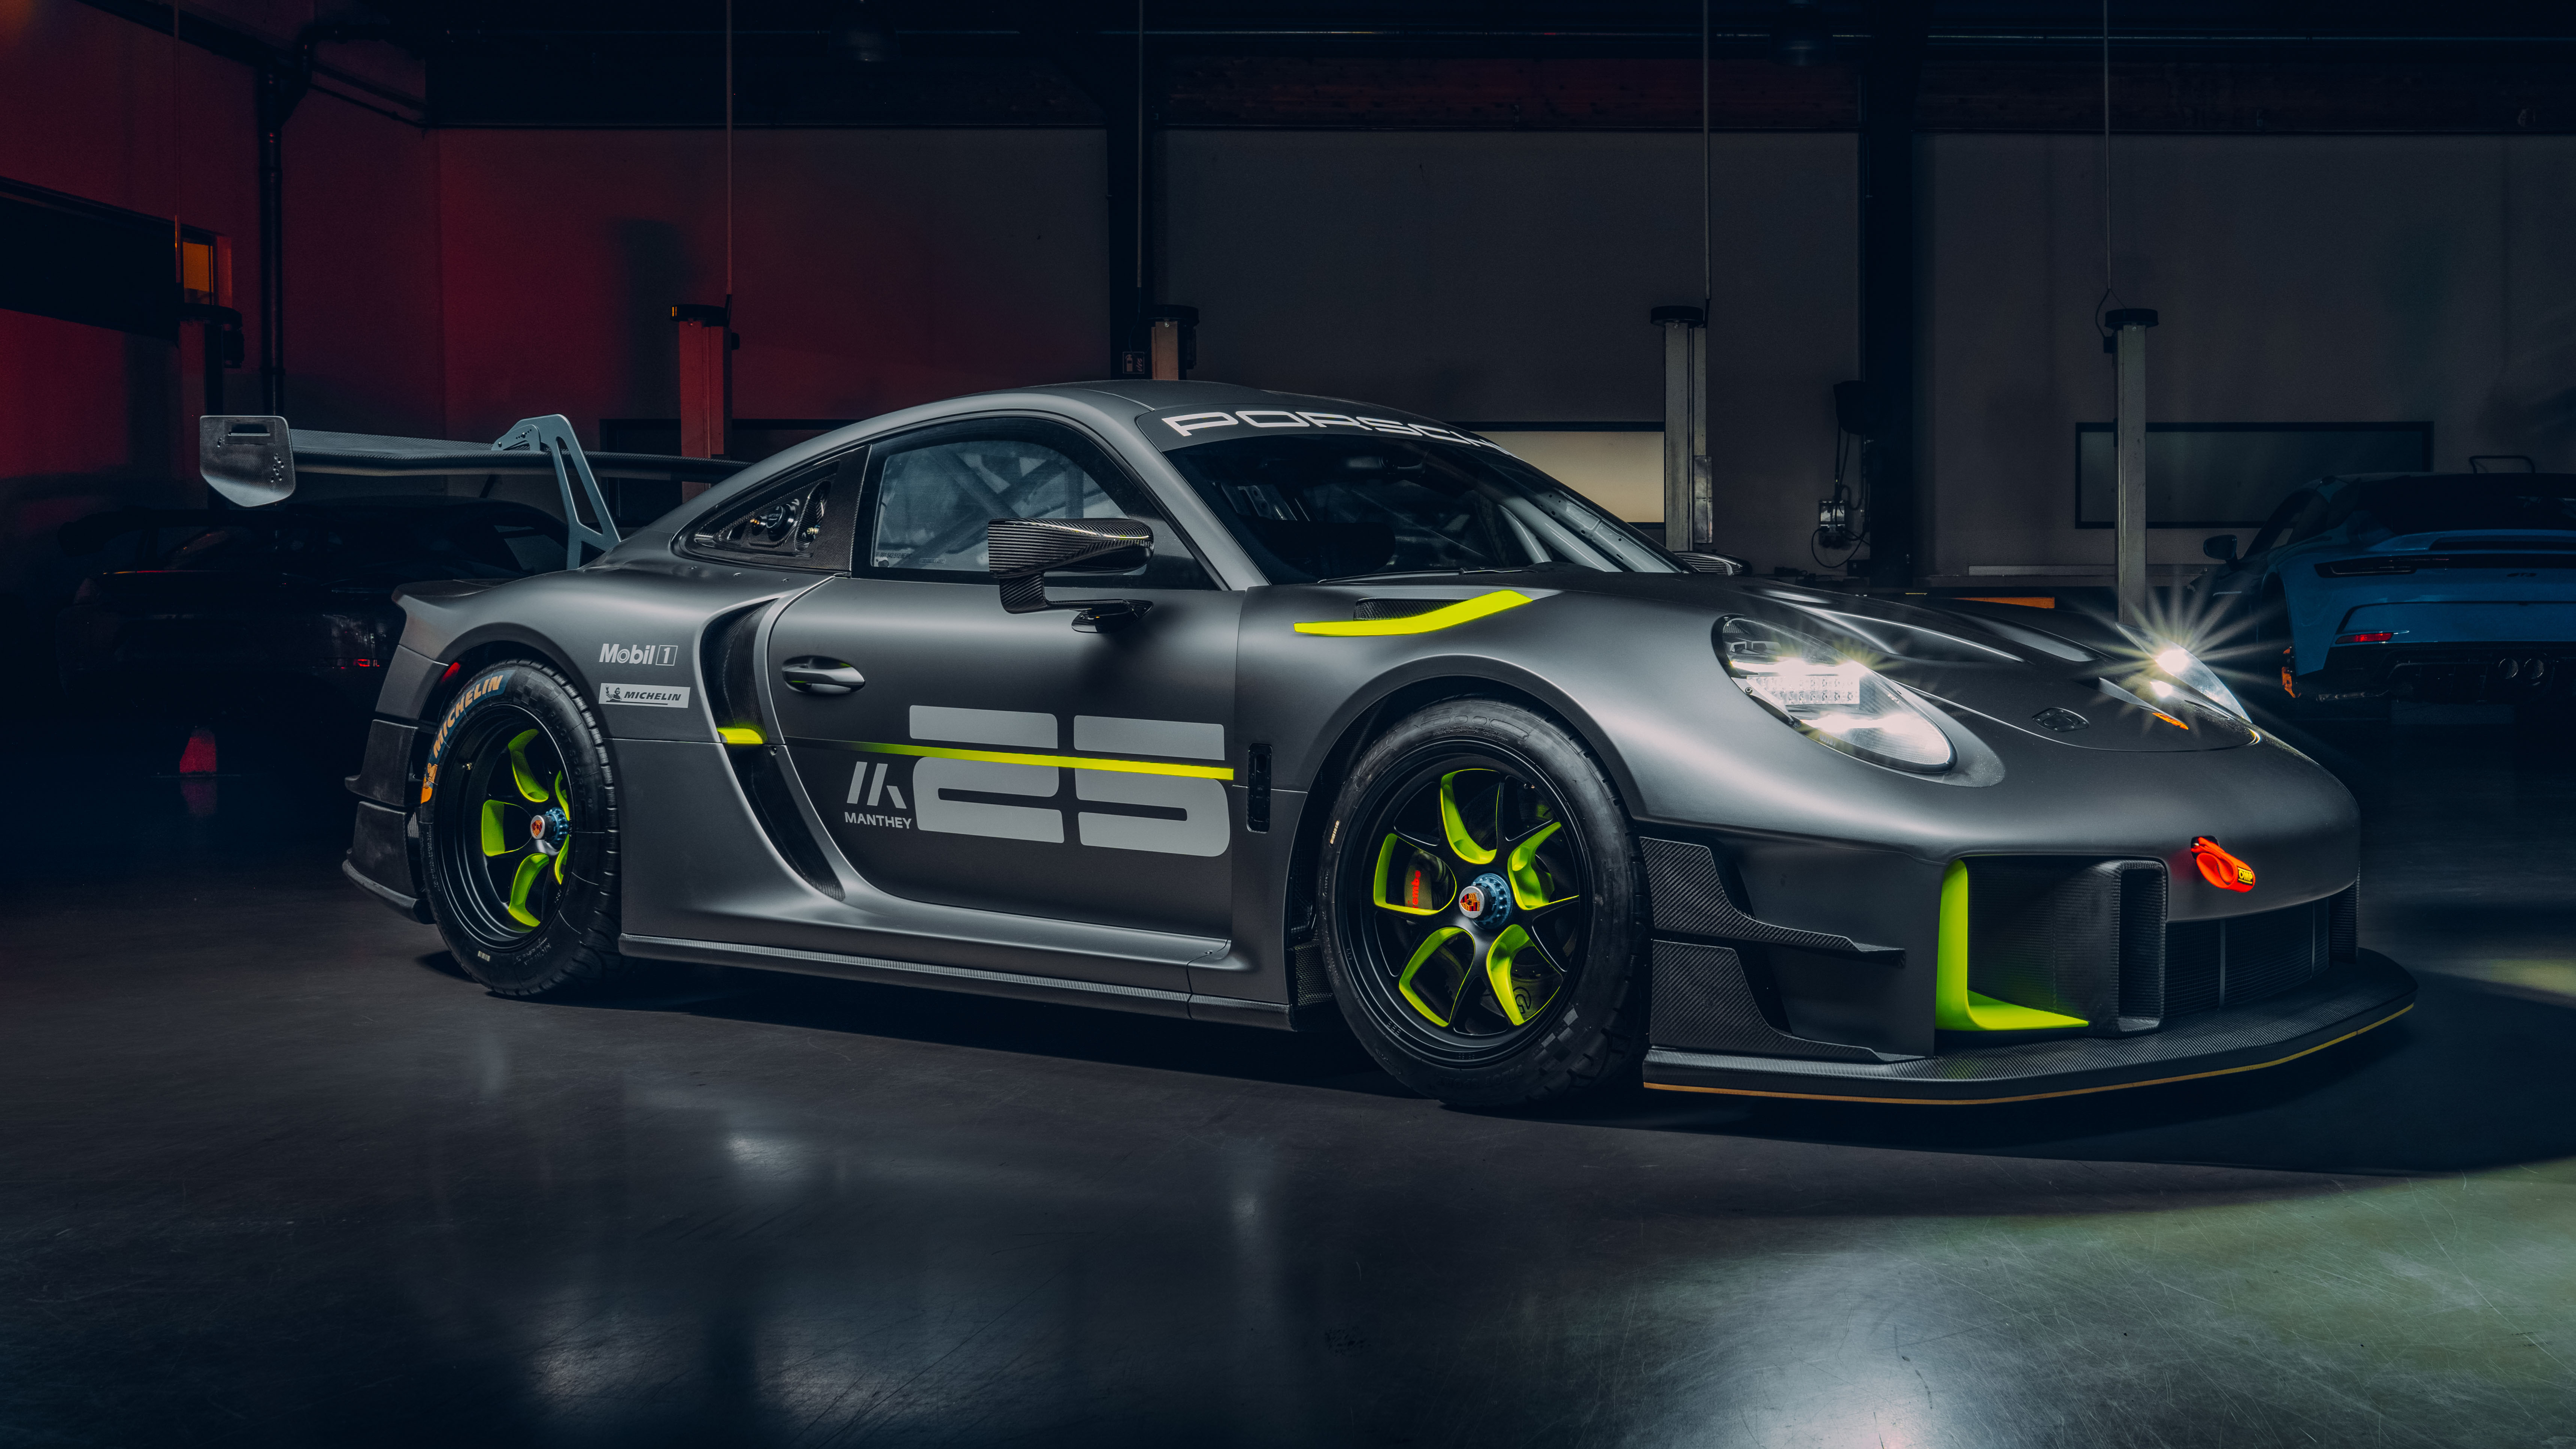 The Porsche 911 GT2 RS Clubsport 25 has sold out